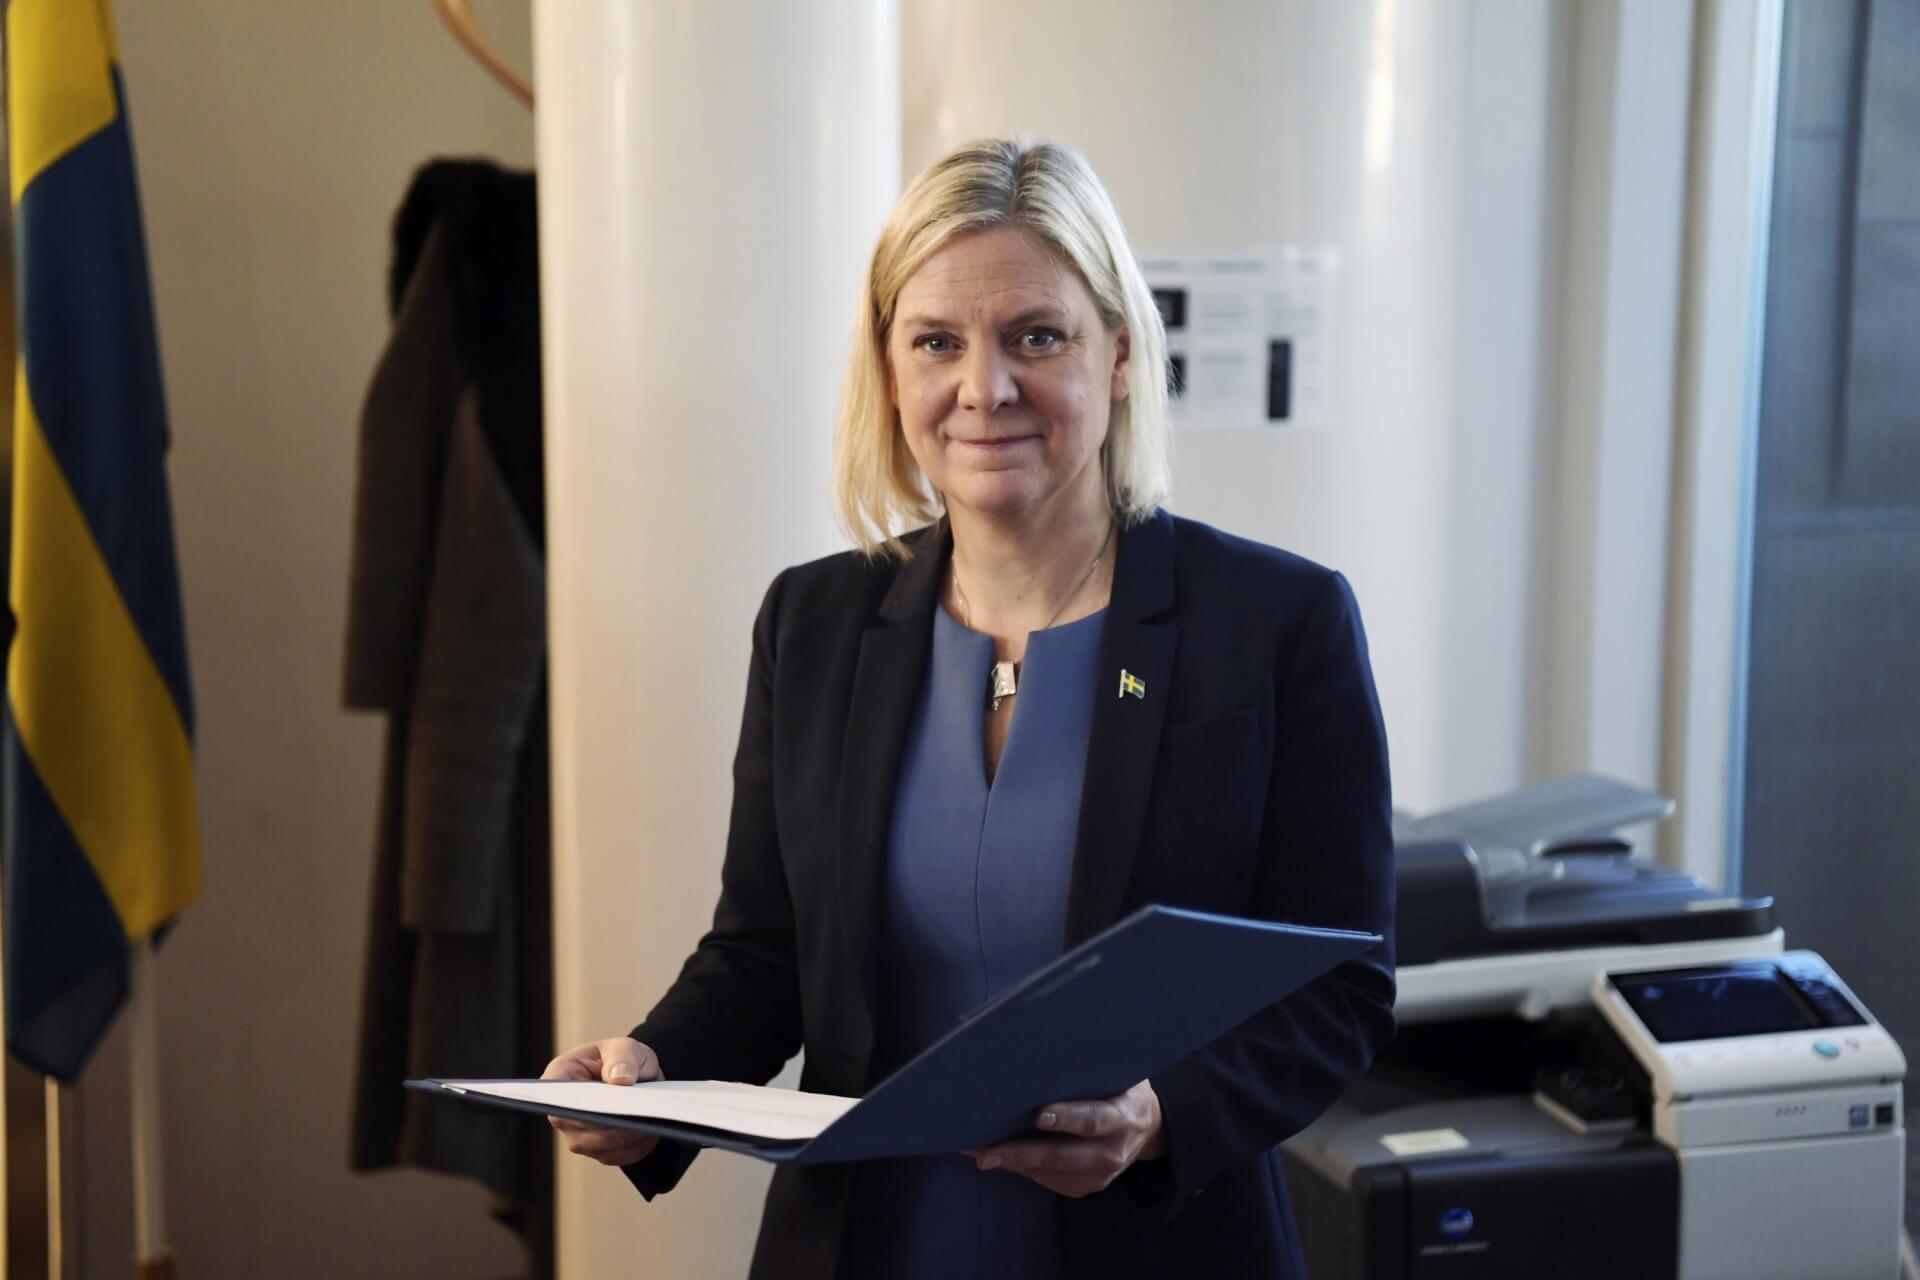 Sweden’s First Female PM Resigns Hours After Appointment Following Collapse of Coalition